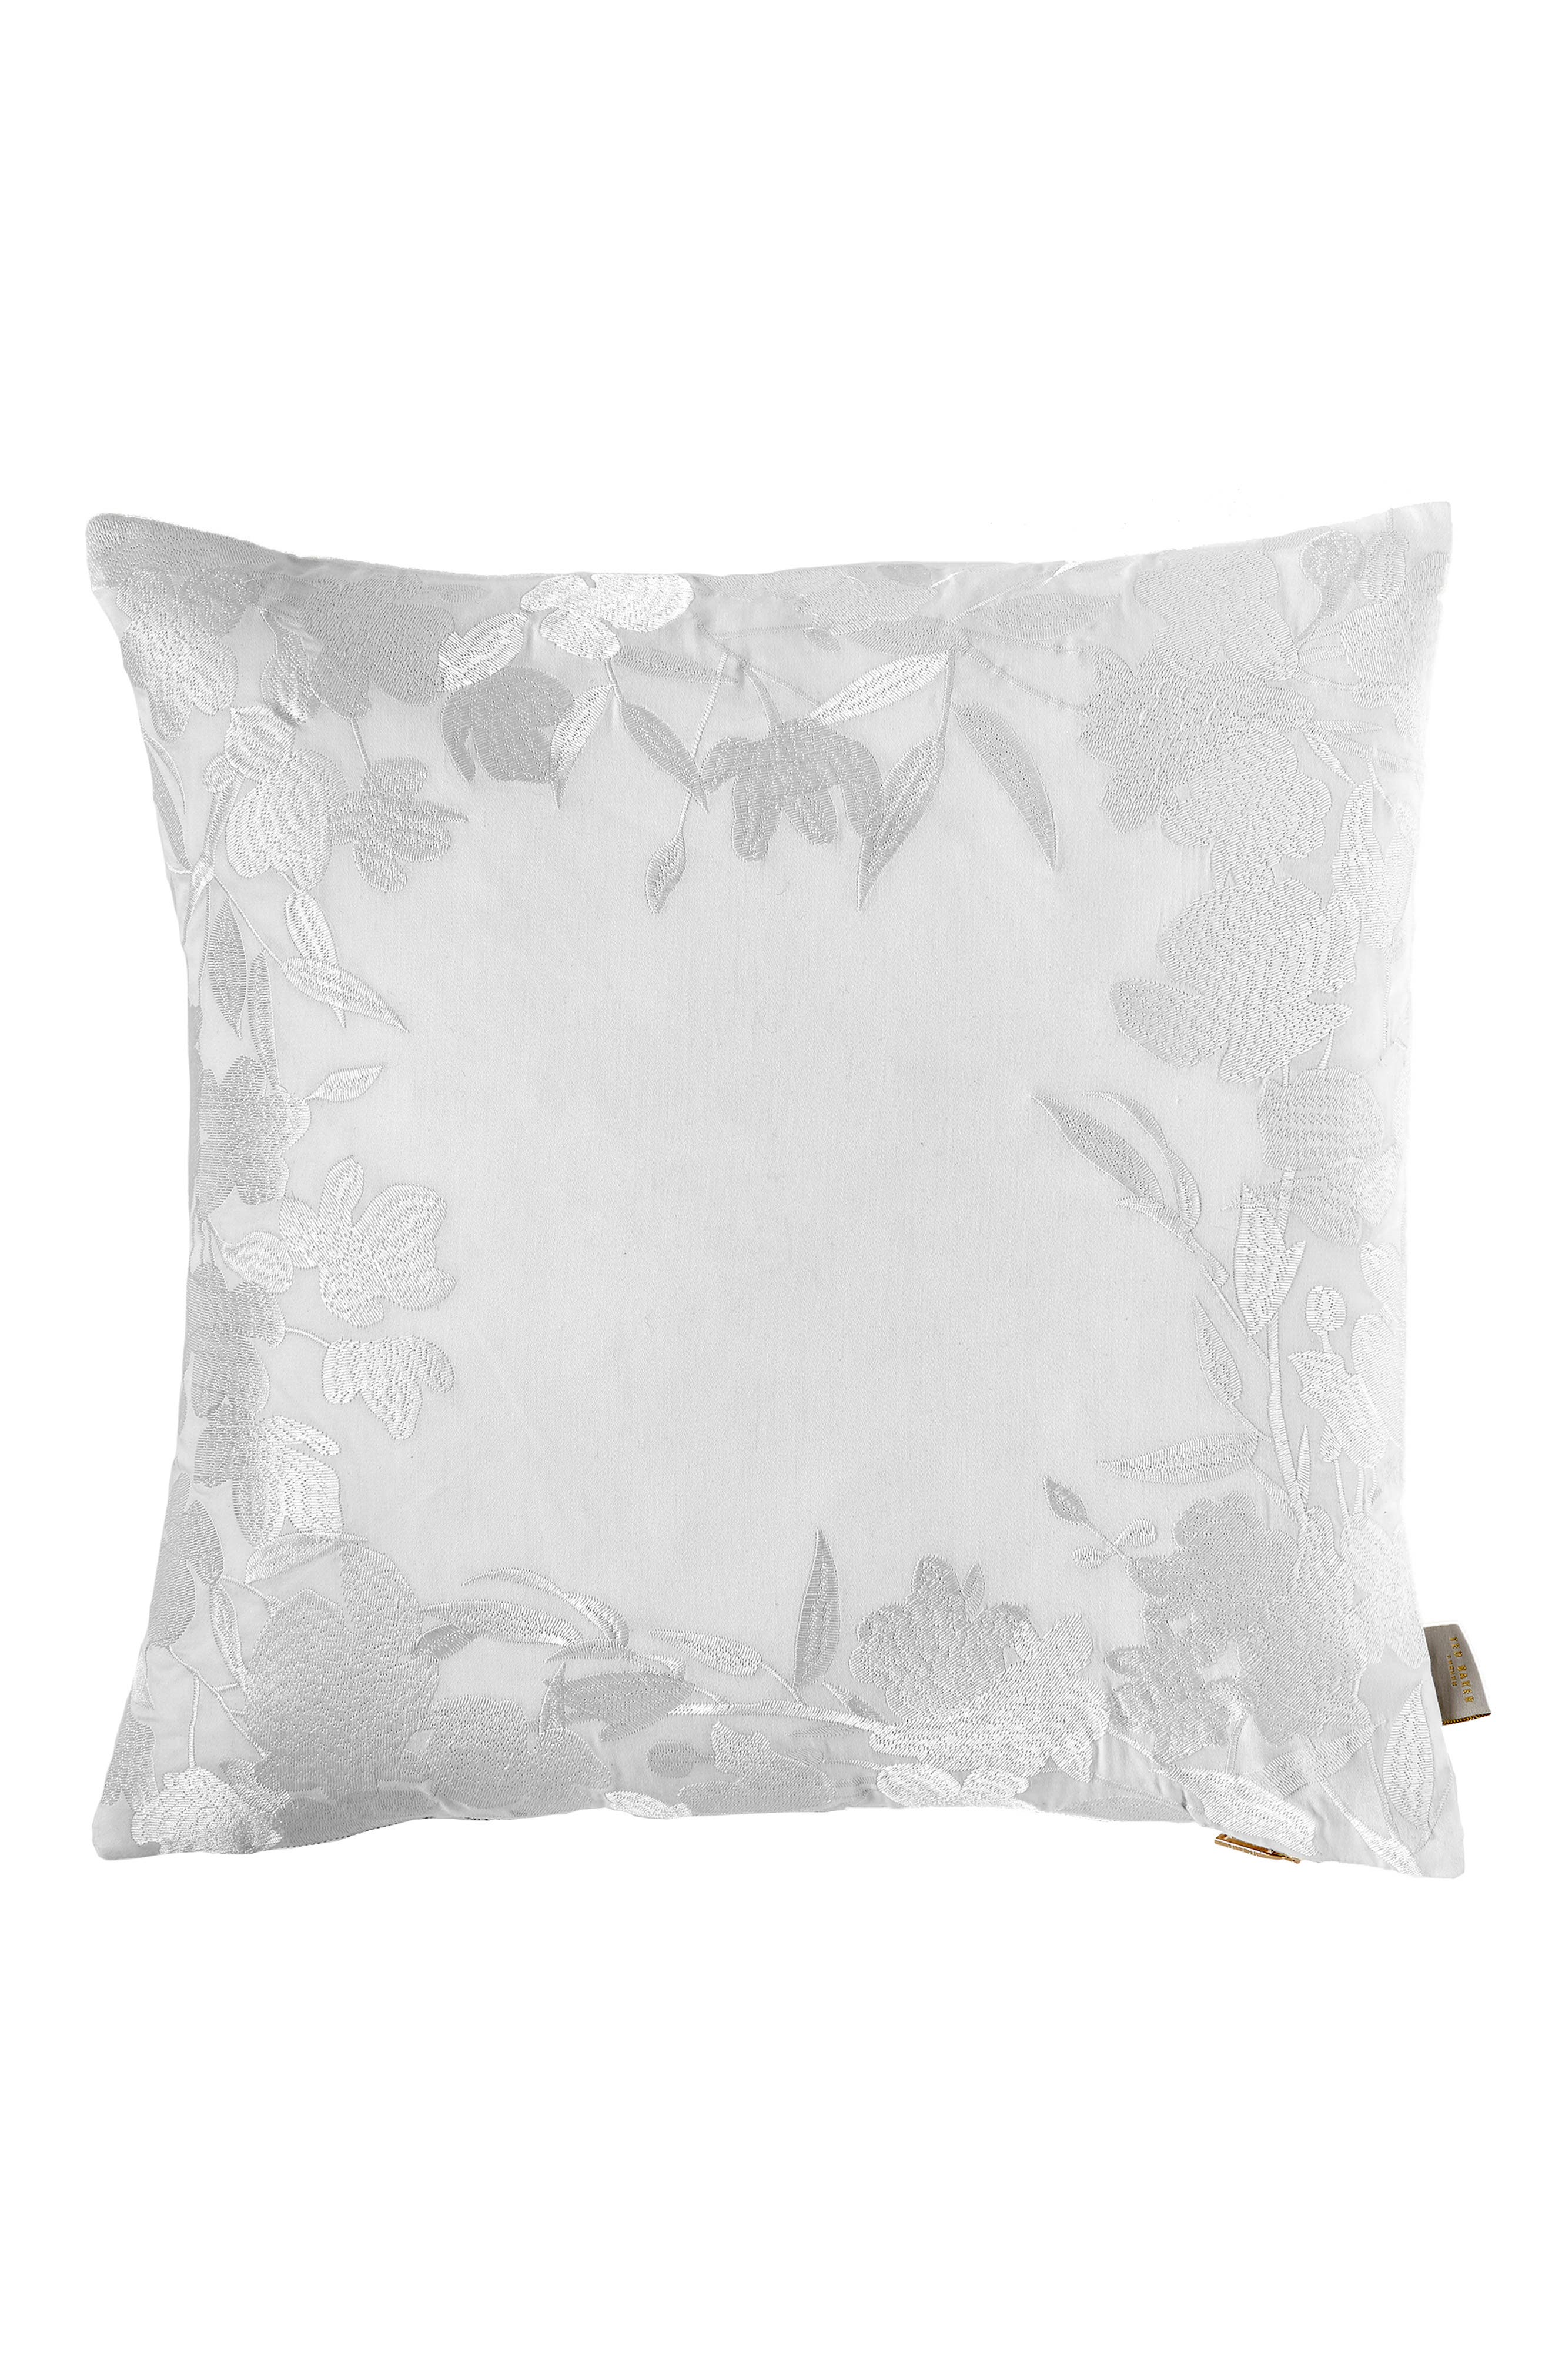 nordstrom pillows and throws